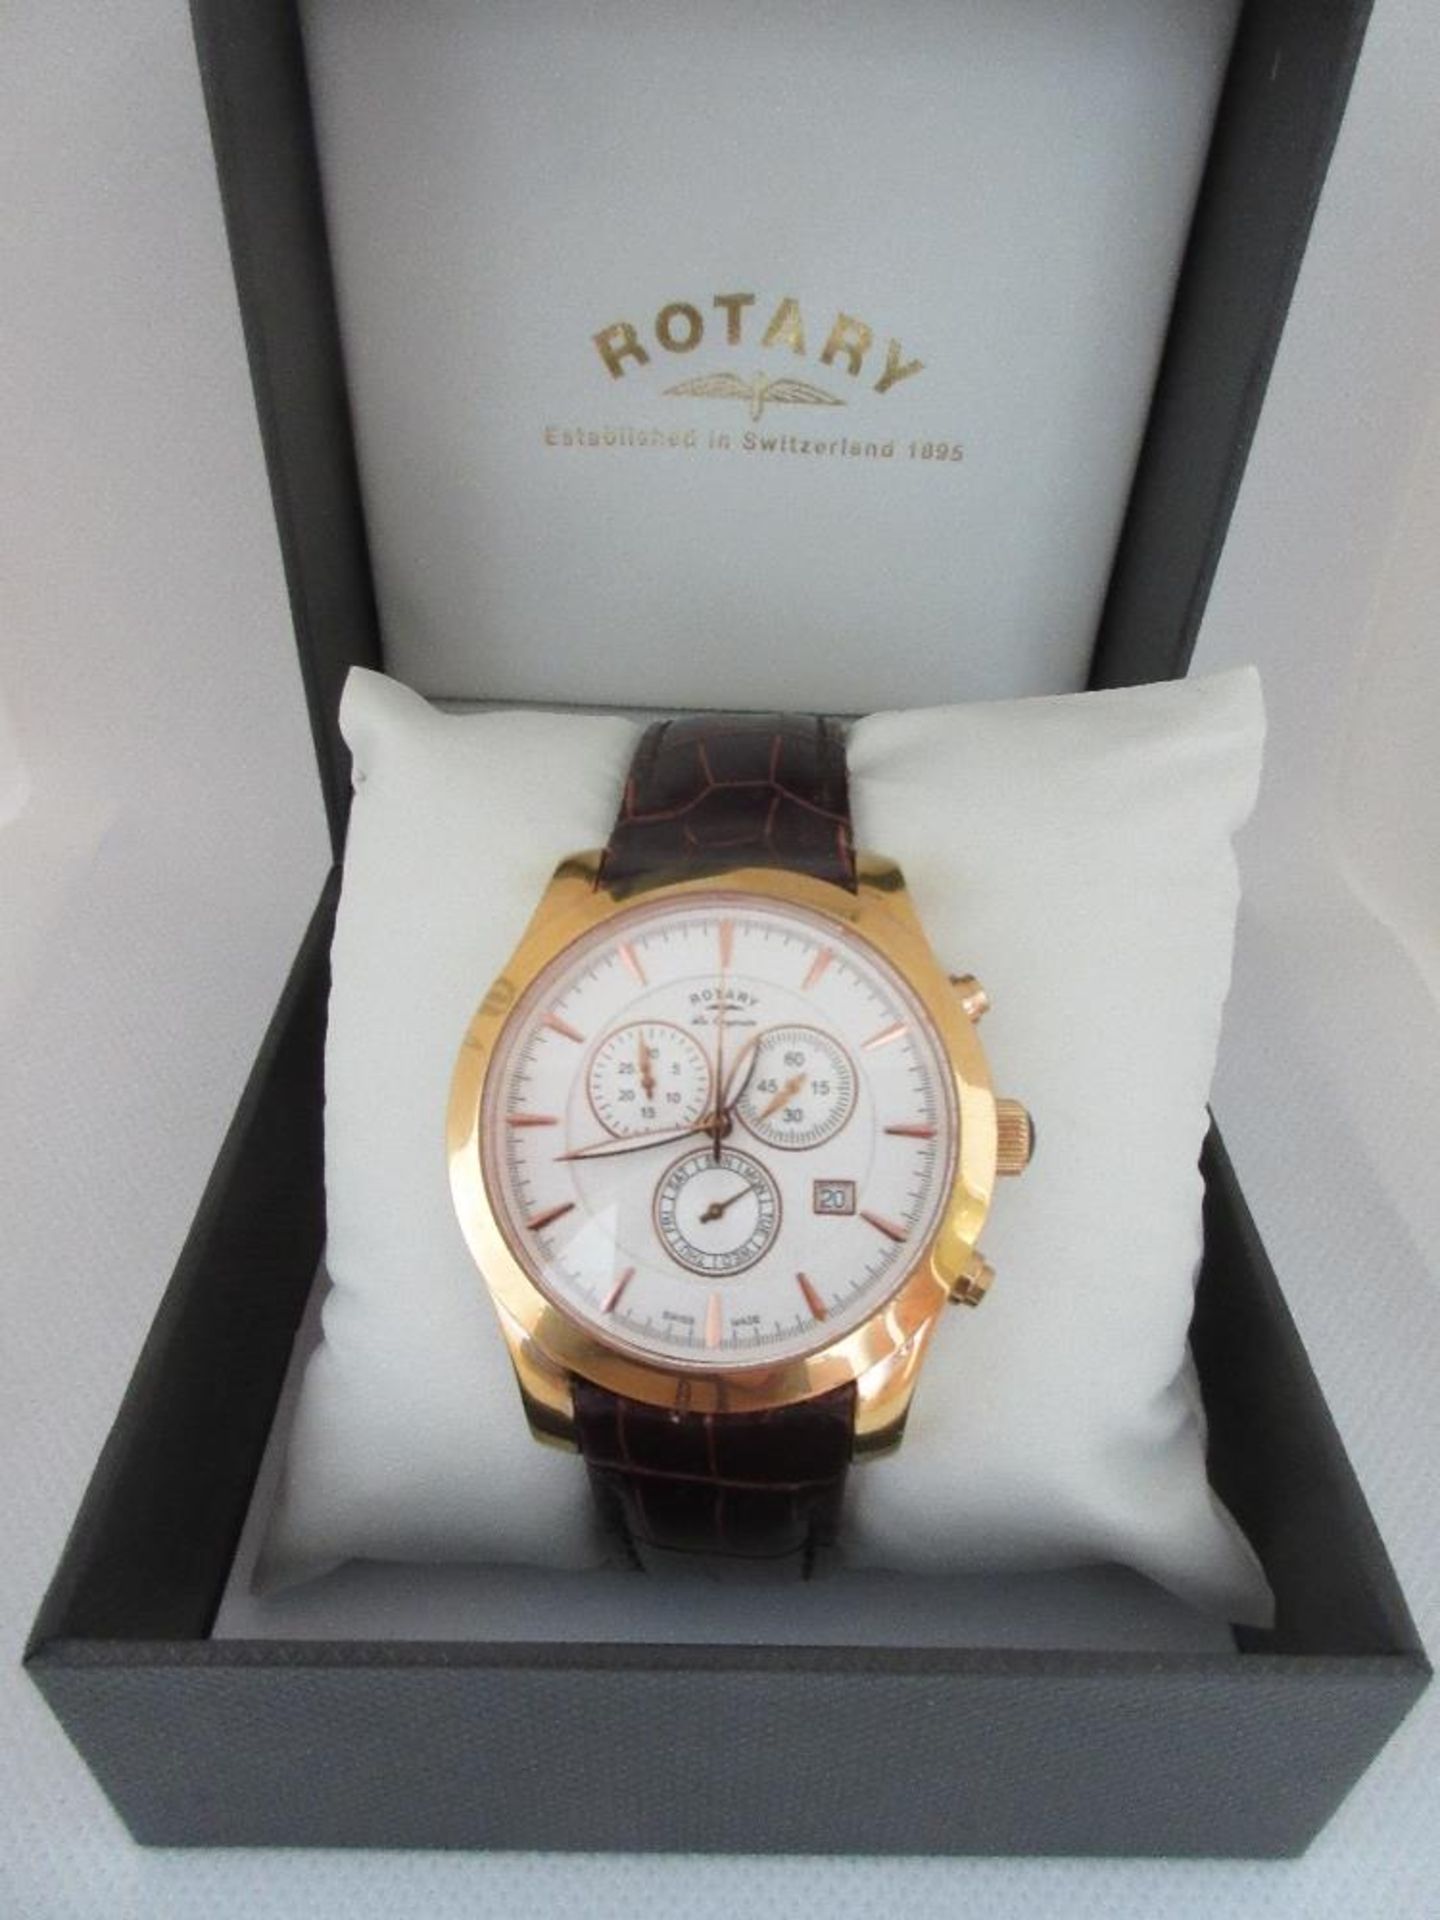 ROTARY MALE WATCH, MODEL 13299, CASE DIAMETER 42MM, LEATHER STRAP, BOXED